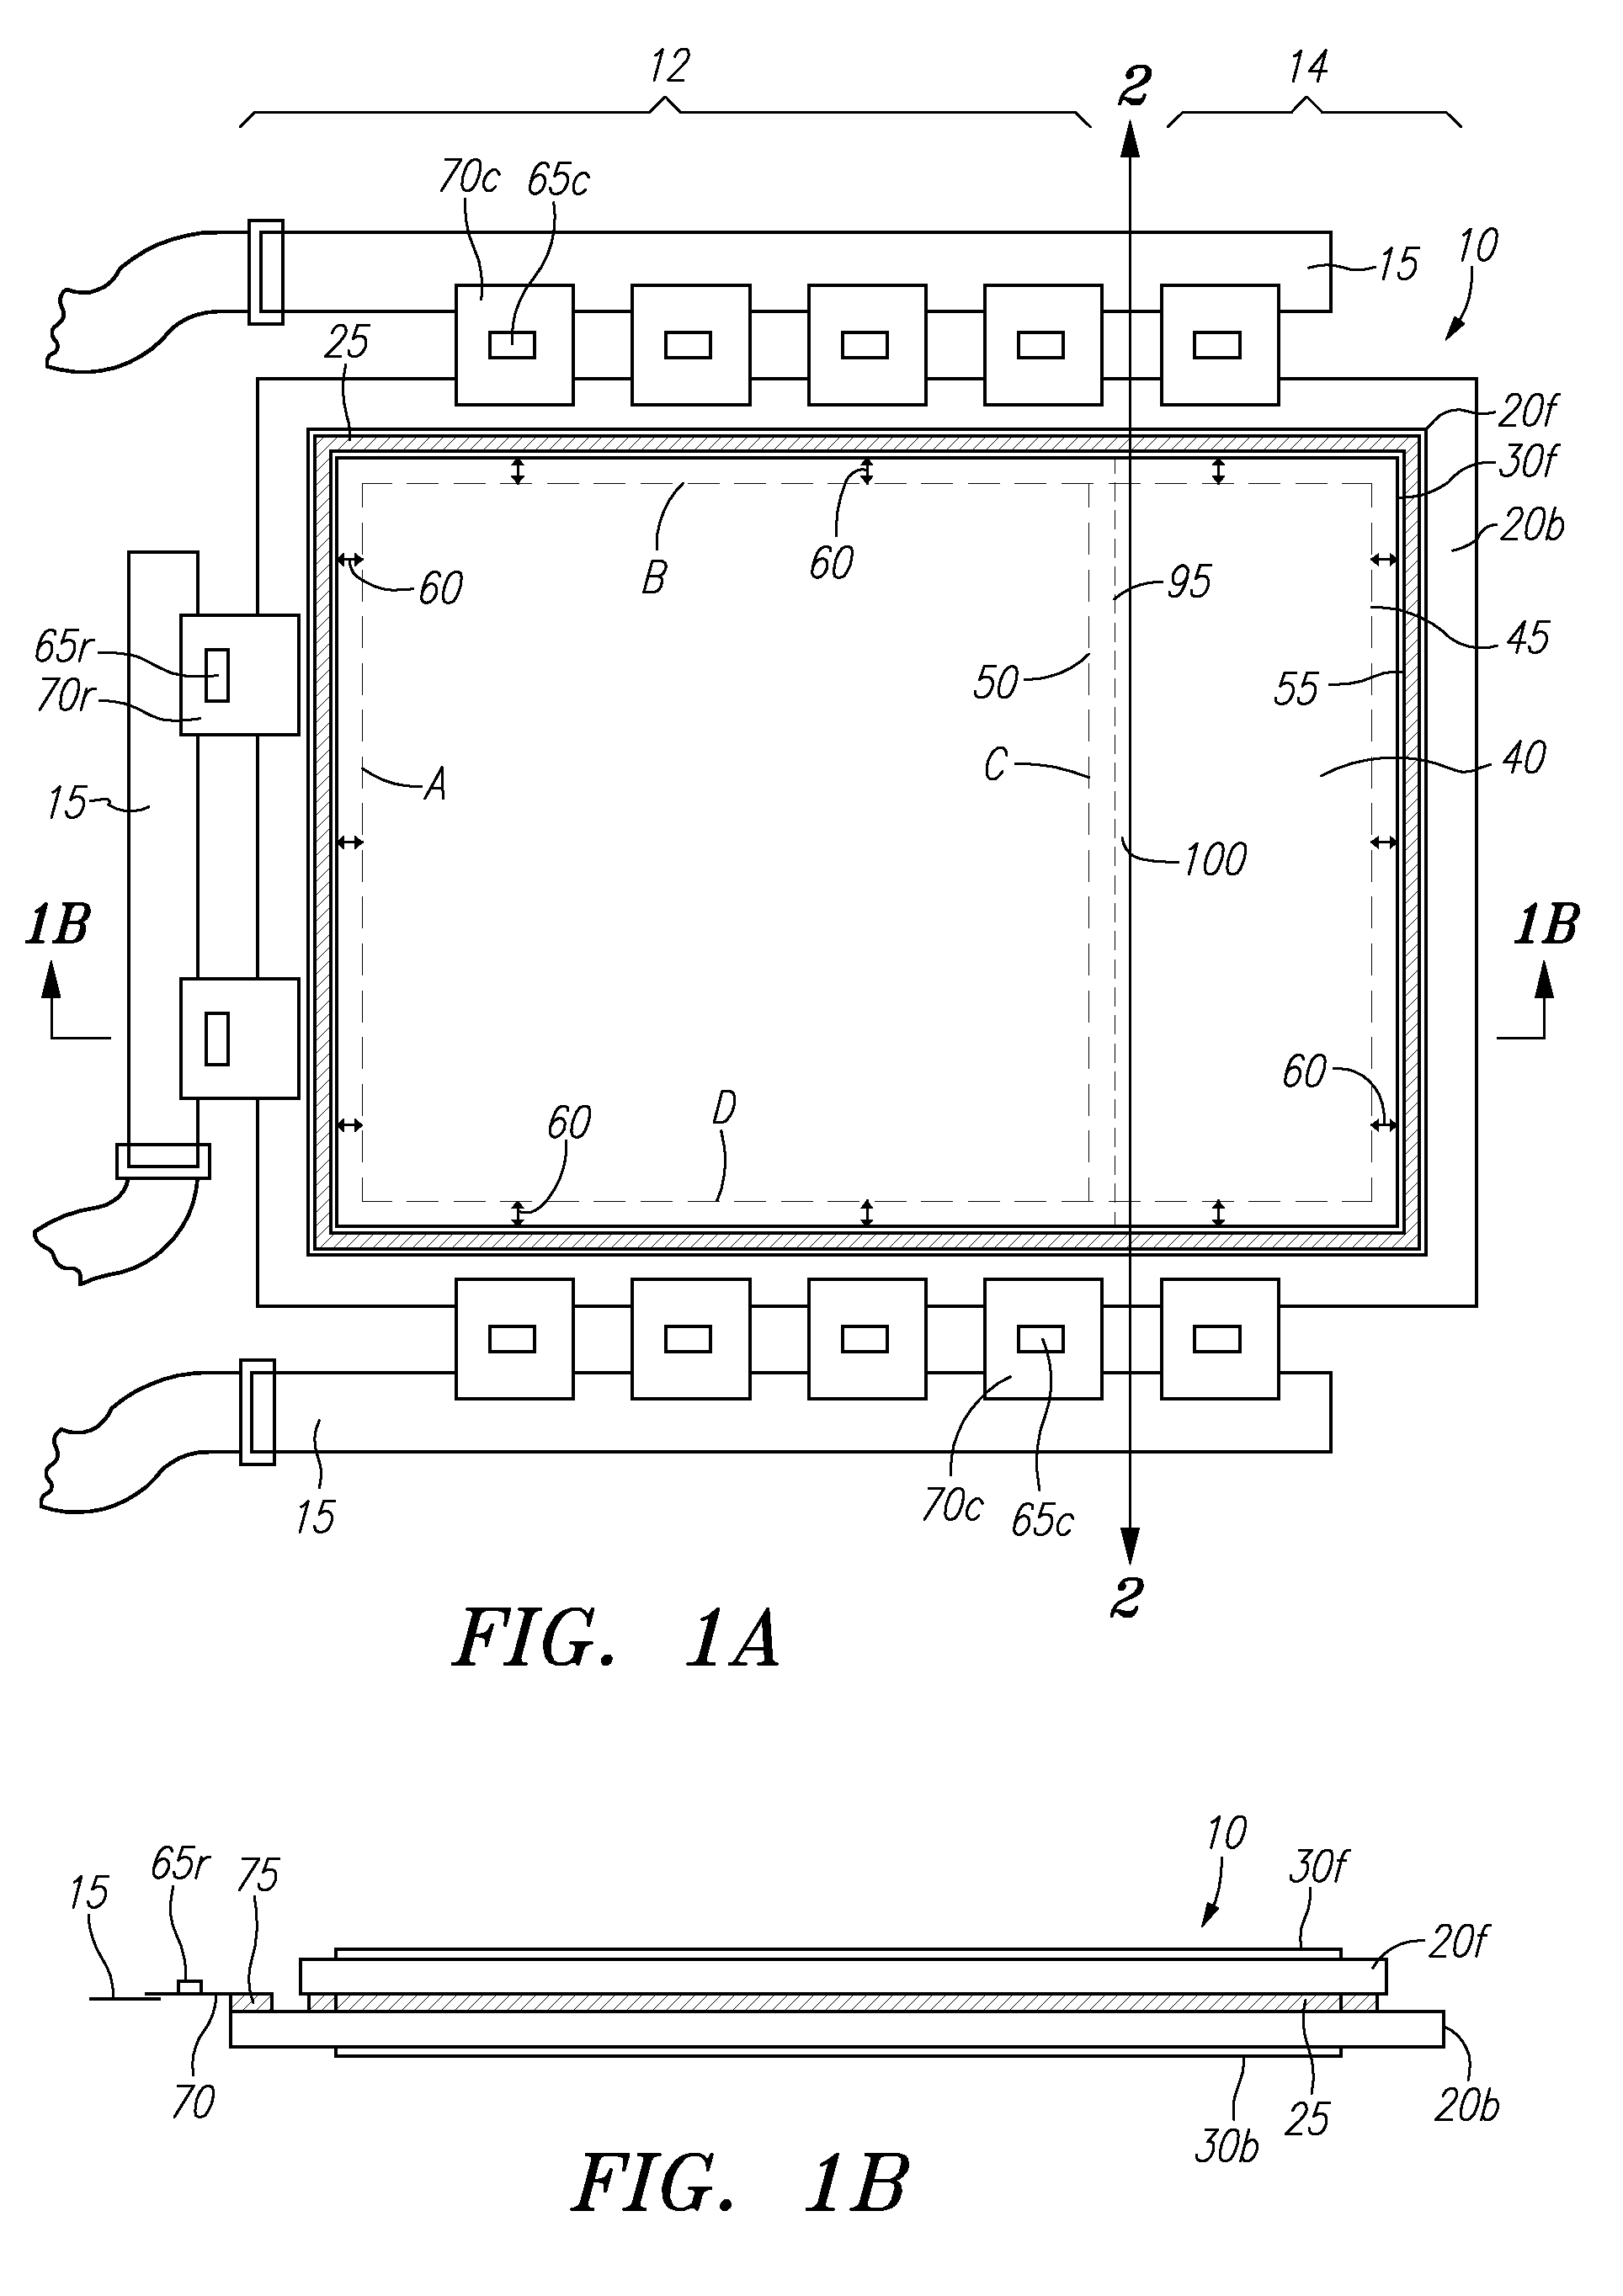 Apparatus and methods for resizing electronic displays